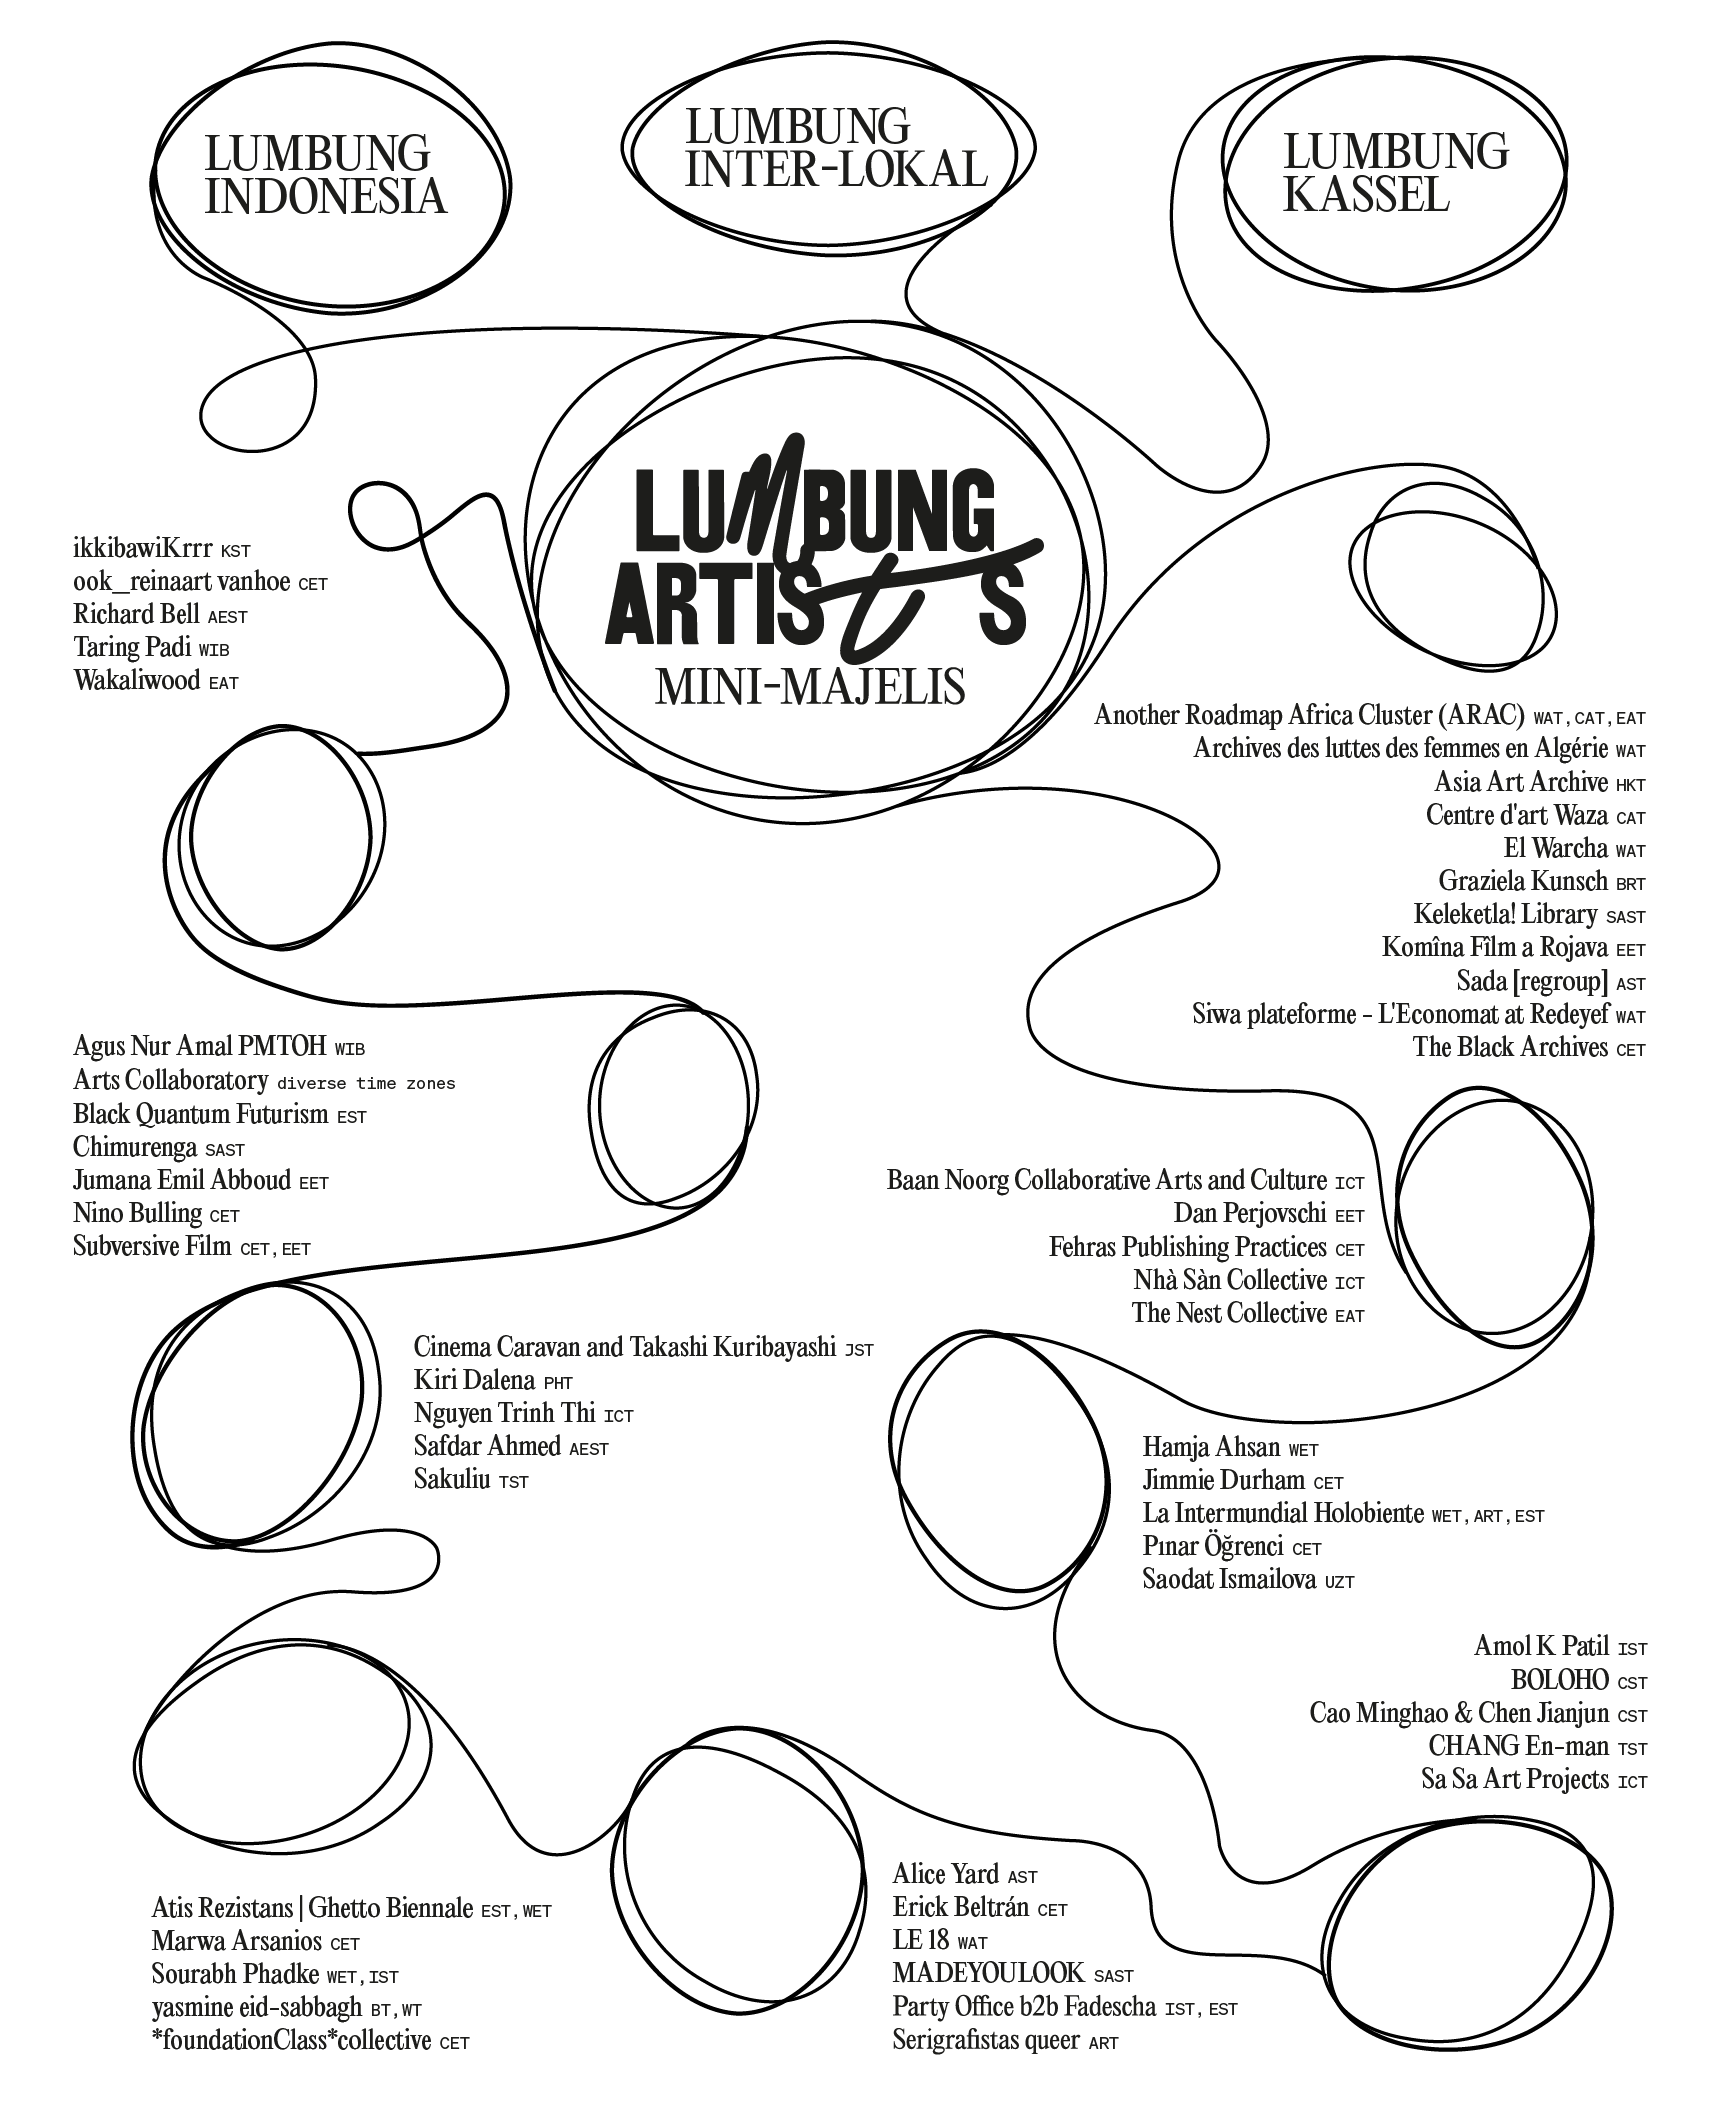 A simple continuous line connects different circles, and surrounds words. Scattered throughout the drawing are the names of the participating artists of documenta fifteen.